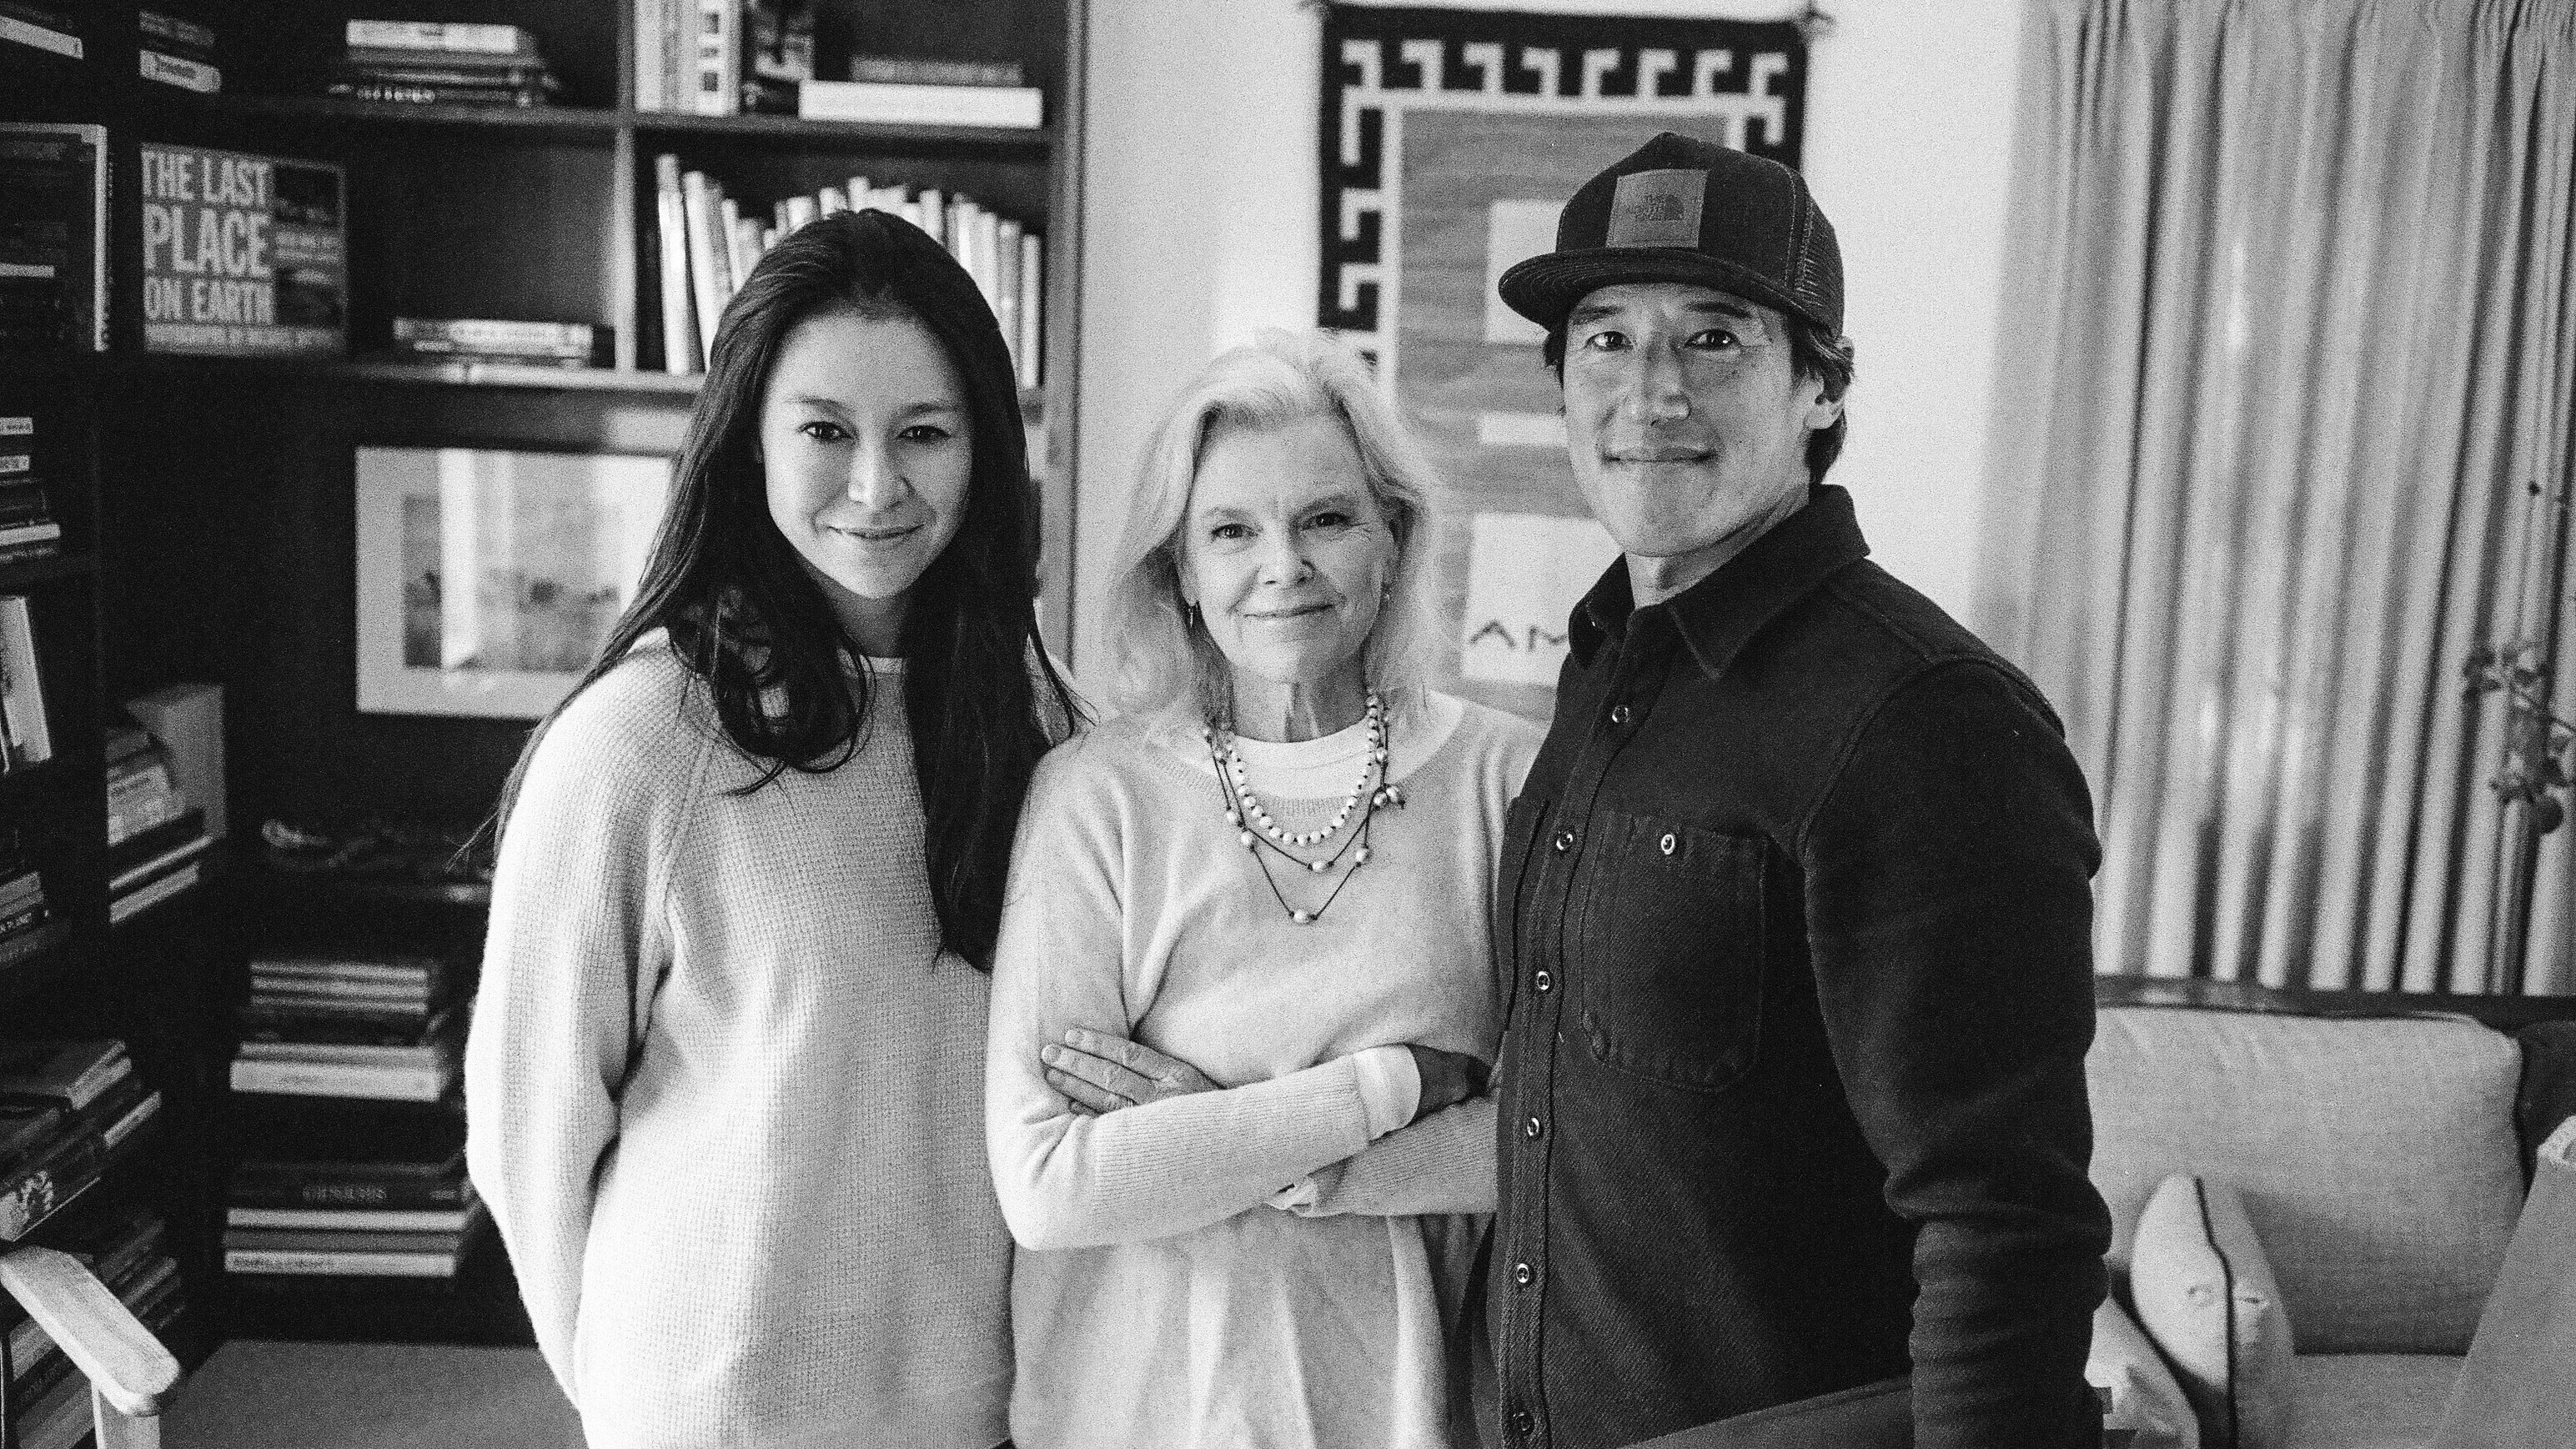 (From left to right): Chai Vasarhelyi, Kris Tompkins and Jimmy Chin. (Clair Popkin/National Geographic Documentary Films)